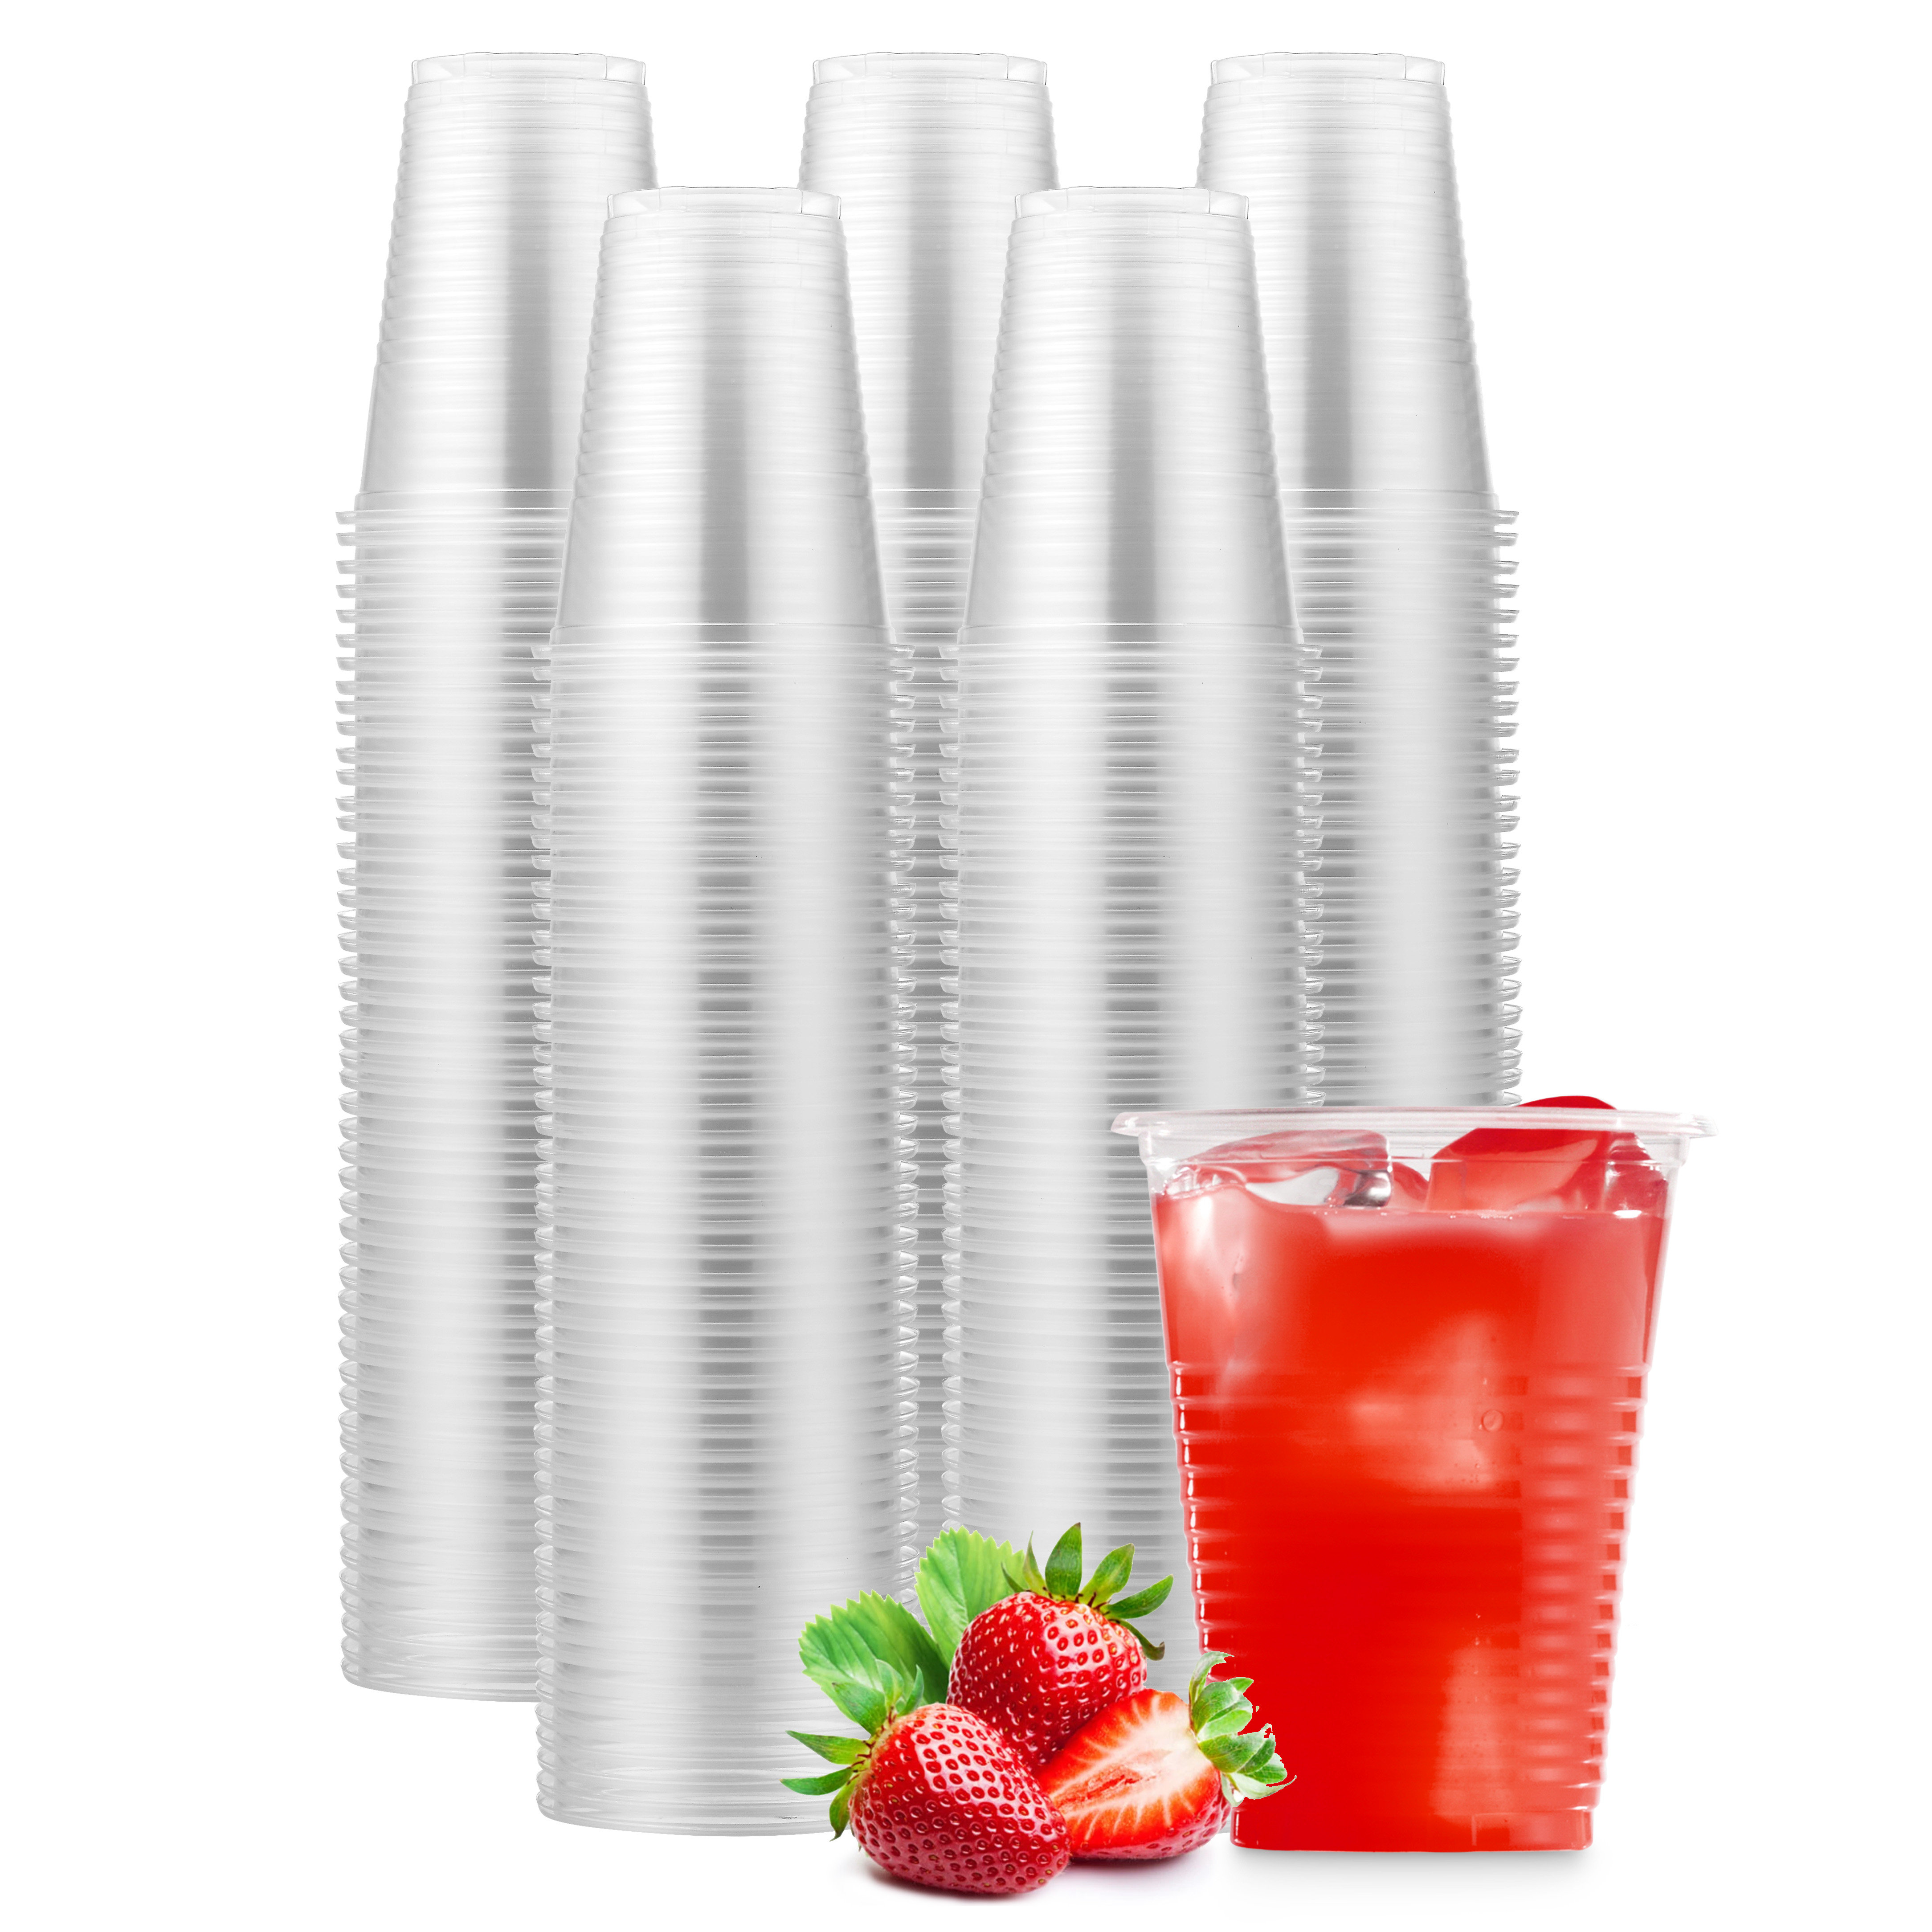 True Red Party Cups, Disposable Cups, Drink Cups for Cocktails and Beer, 16  Ounce Capacity, Plastic, Red, Set of 100